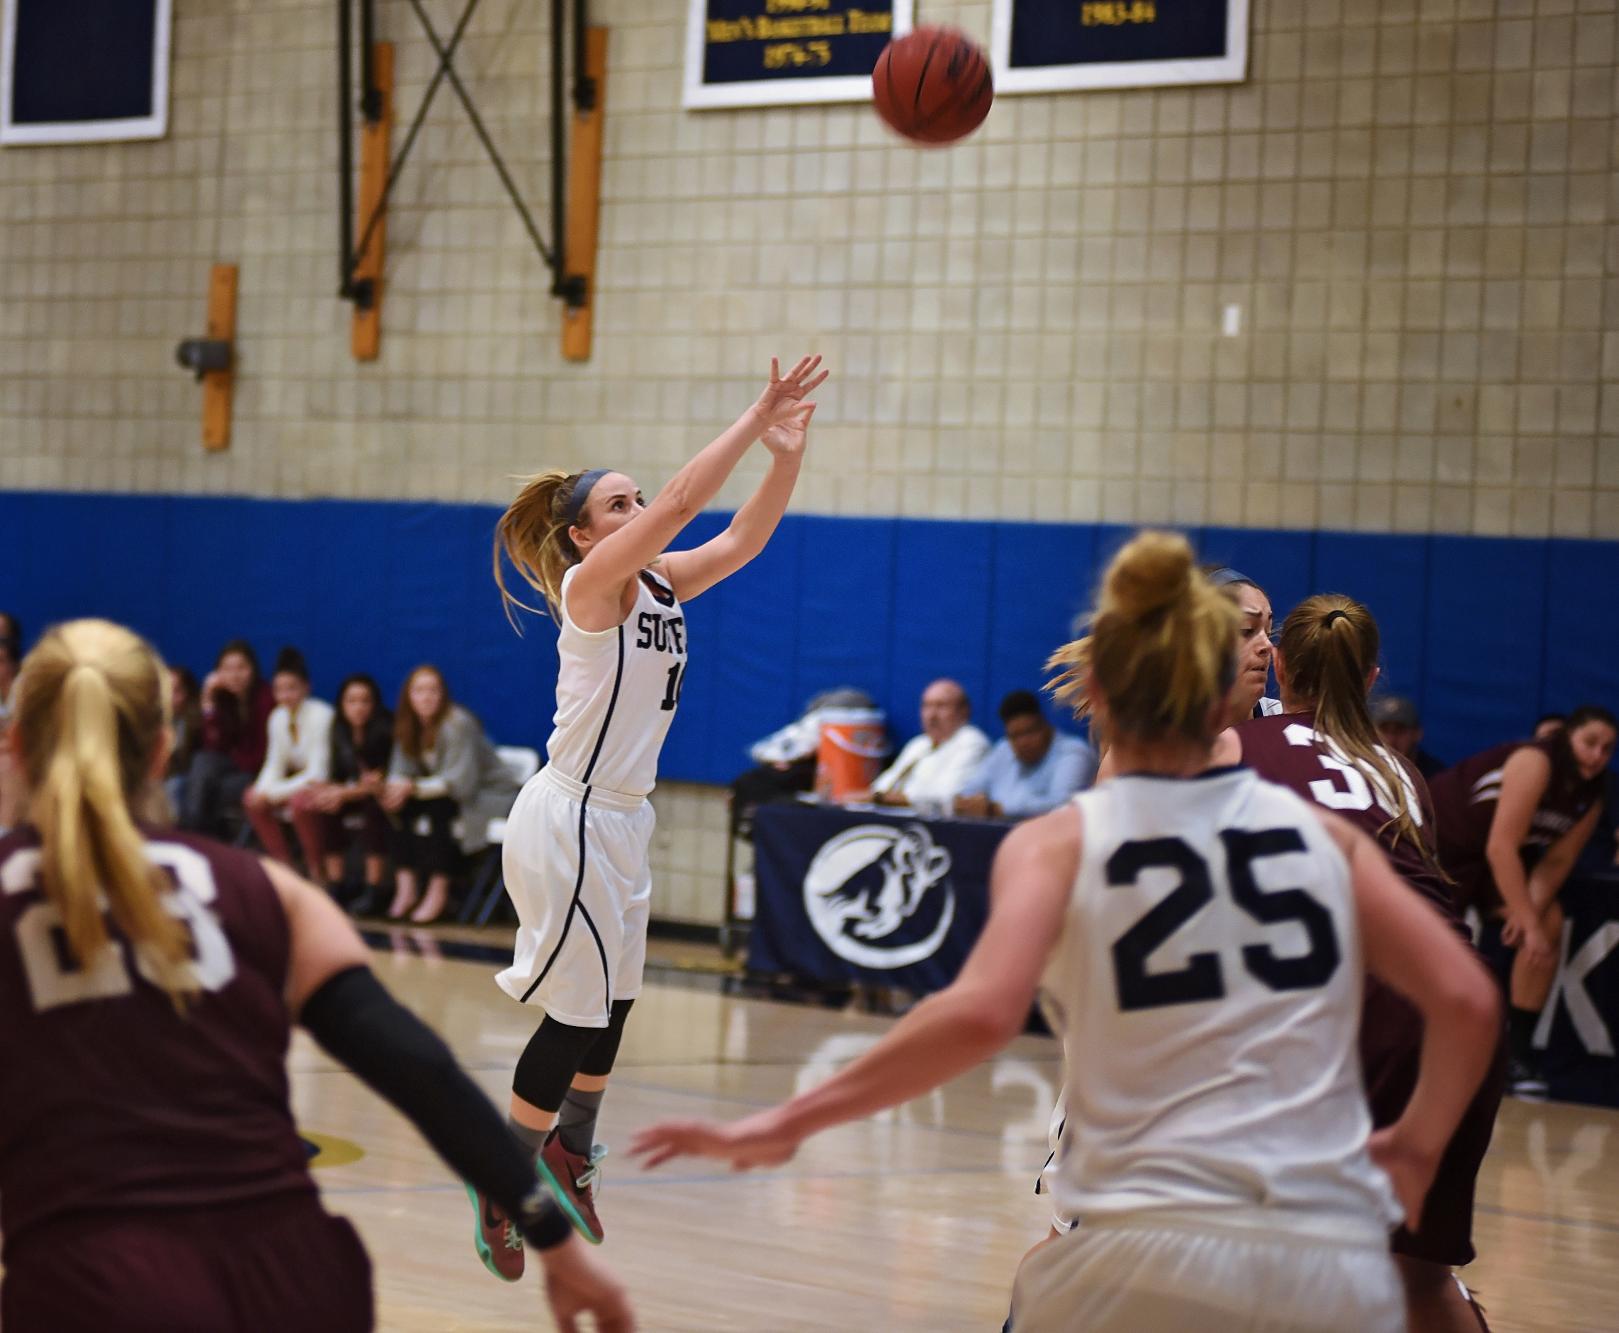 Women’s Basketball Clashes at Wentworth Tuesday